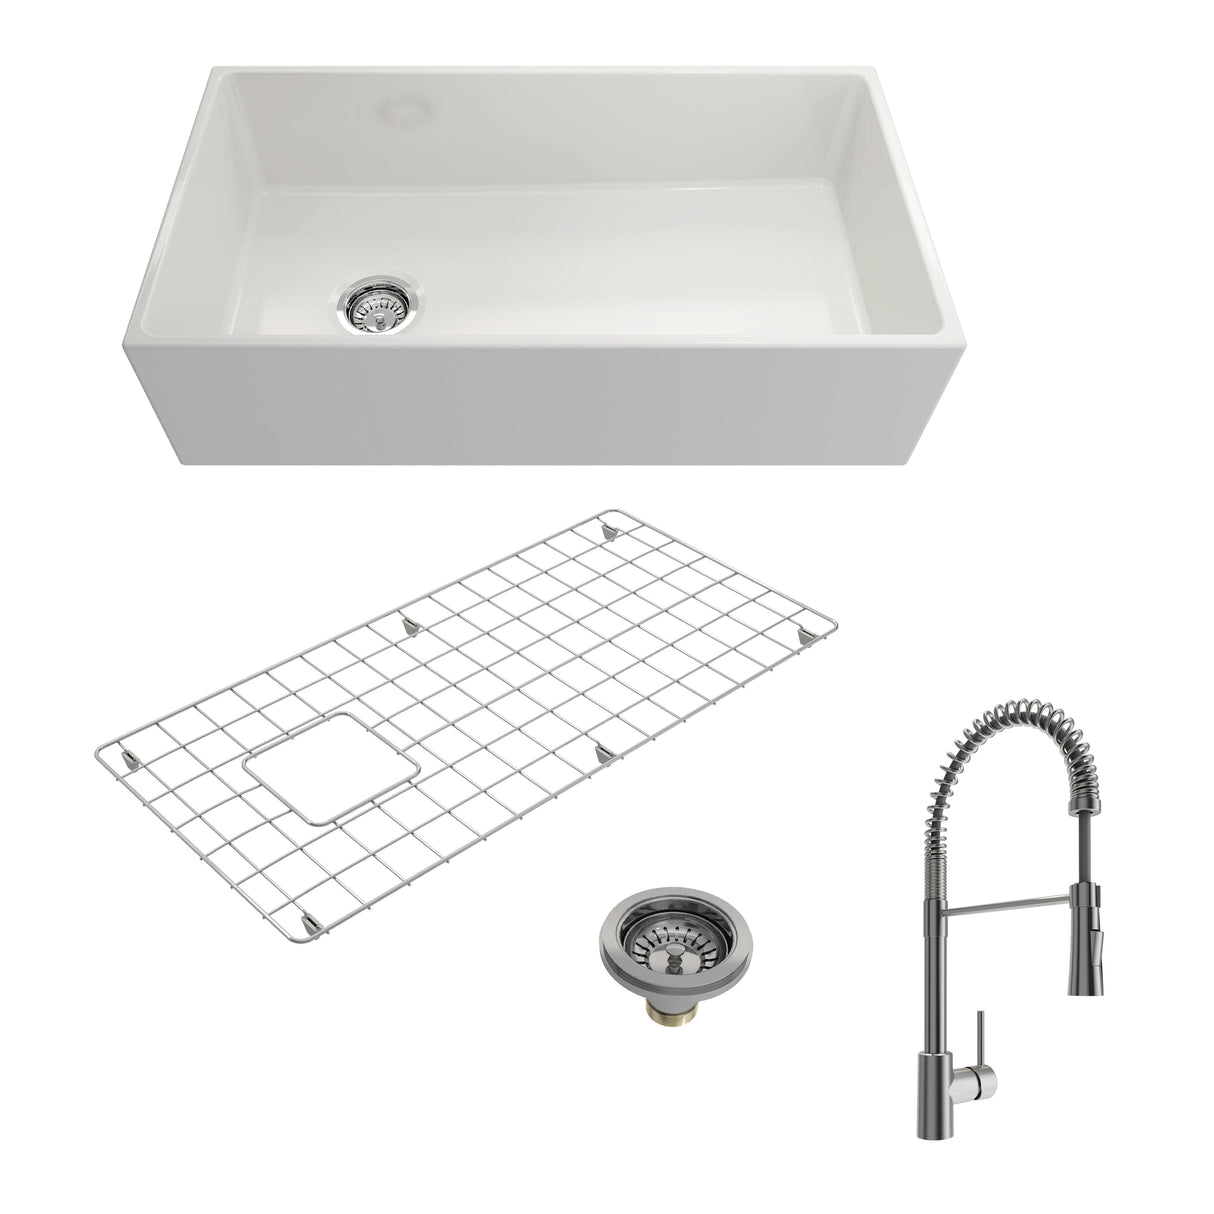 BOCCHI 1354-001-2020SS Kit: 1354 Contempo Apron Front Fireclay 36 in. Single Bowl Kitchen Sink with Protective Bottom Grid and Strainer w/ Livenza 2.0 Faucet